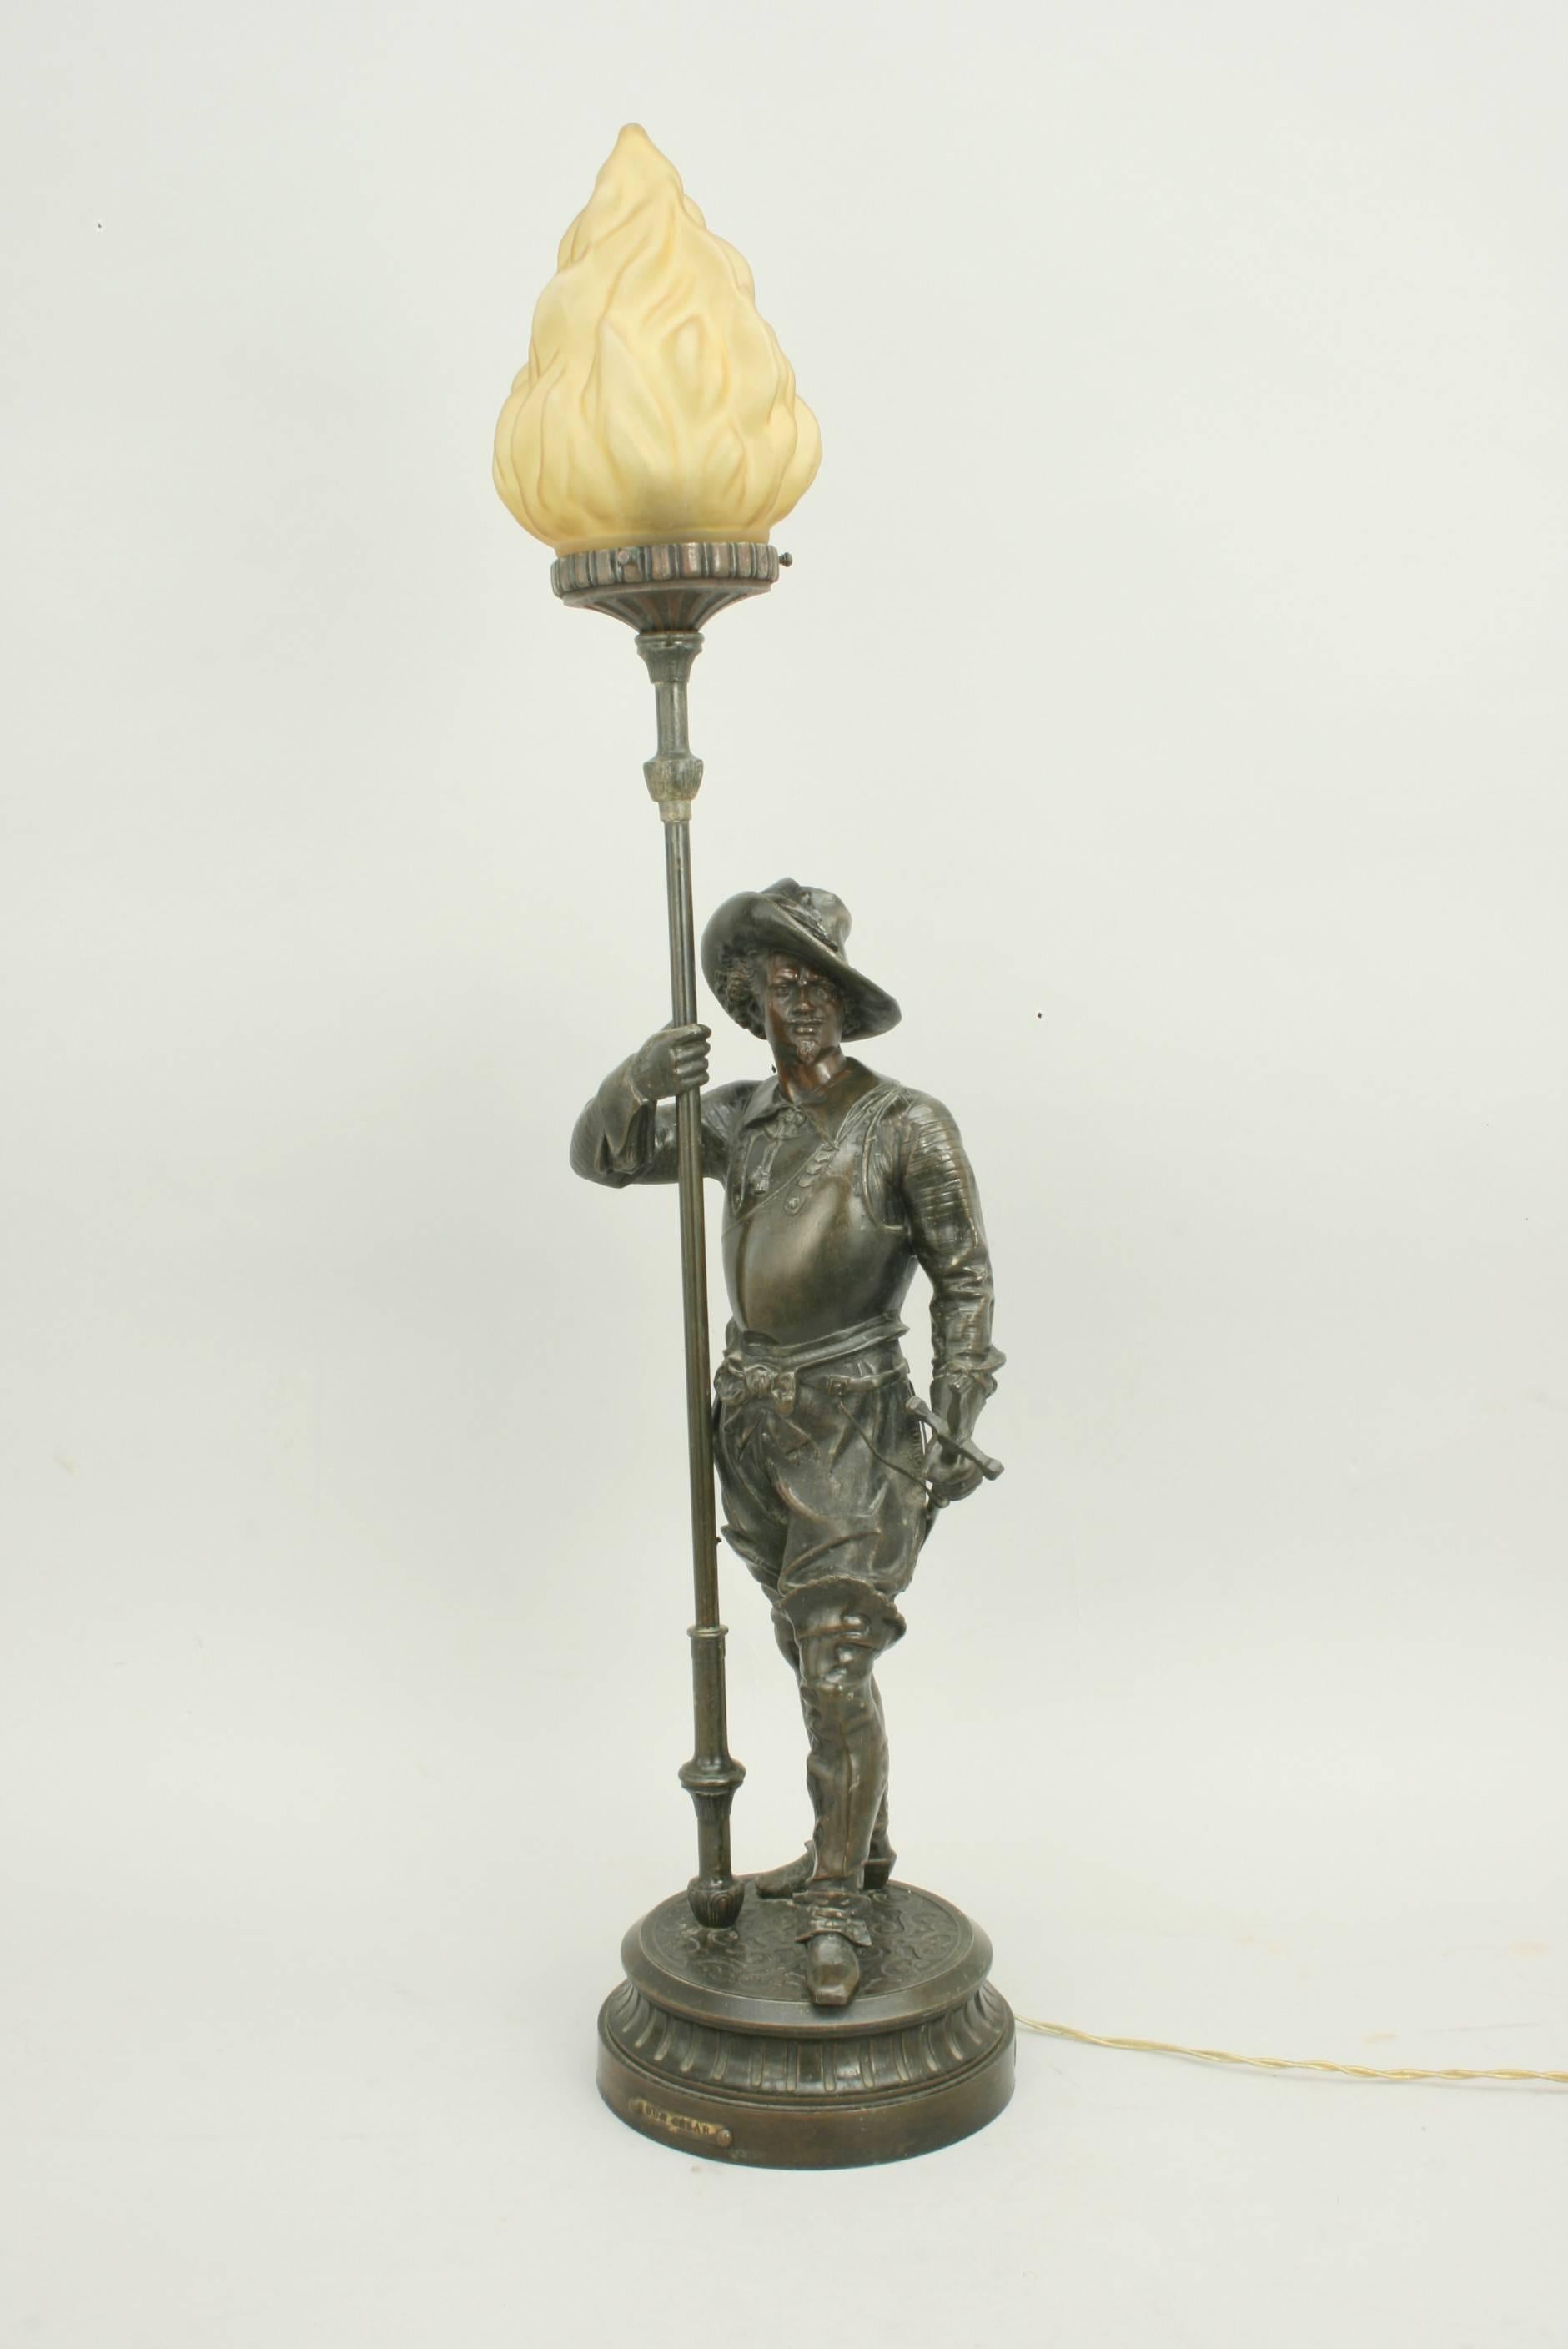 Bronzed cavalier lamp.
A wonderful French bronzed spelter sculpture of a cavalier. The figure is mounted on a circular plinth with a brass plaque mounted on the front with title and artist on it 'Don Cesar' Par Poitevin. An attractive table lamp